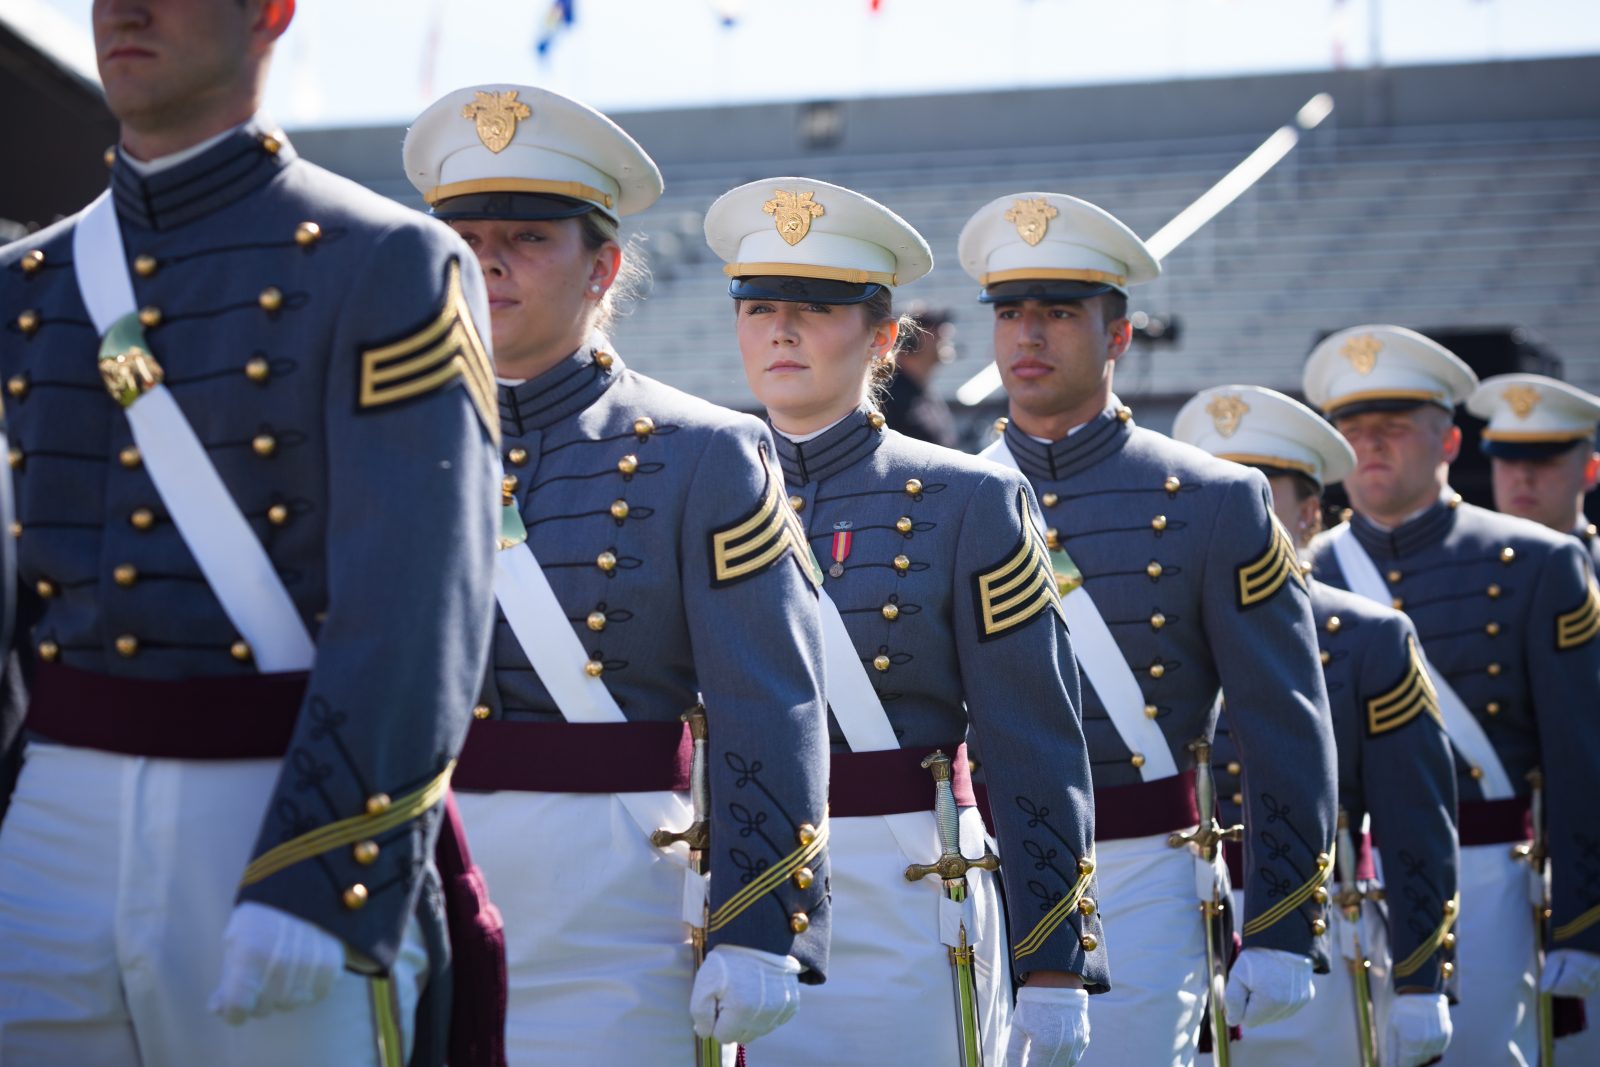 U.S. Military Academy cadets marching